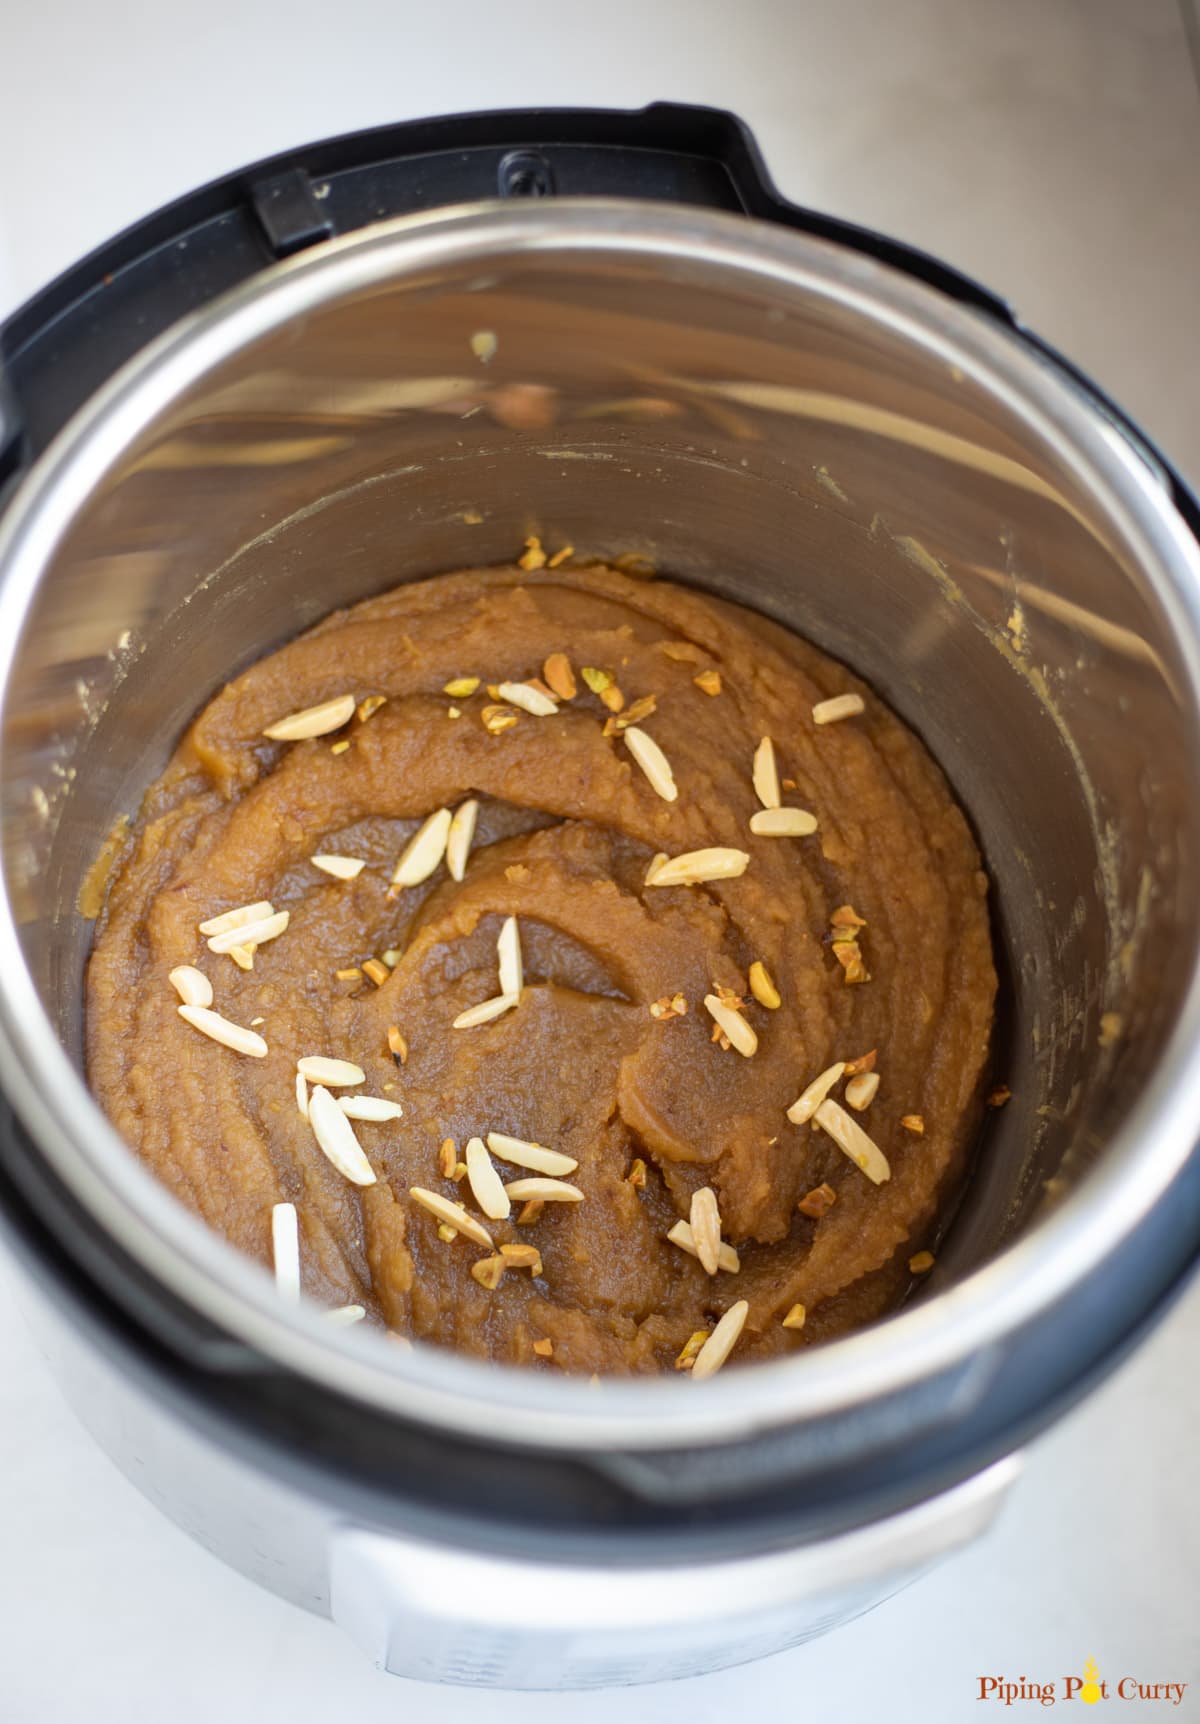 Halwa garnished with sliced almonds in the instant pot